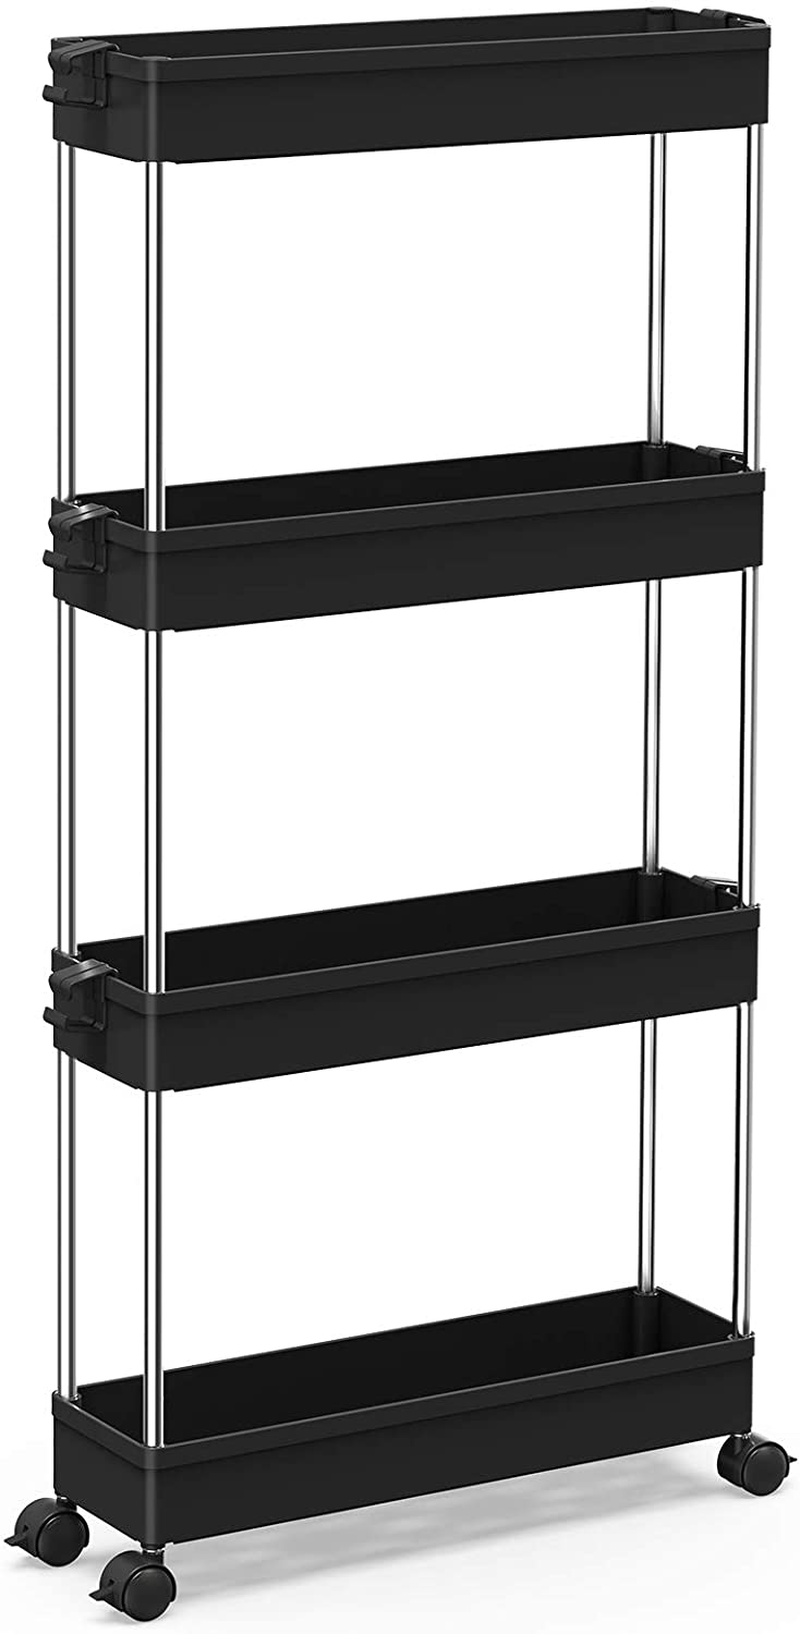 SPACEKEEPER 4 Tier Slim Storage Cart Mobile Shelving Unit Organizer Slide Out Storage Rolling Utility Cart Tower Rack for Kitchen Bathroom Laundry Narrow Places, Plastic & Stainless Steel, White Home & Garden > Kitchen & Dining > Food Storage SPACEKEEPER Black  